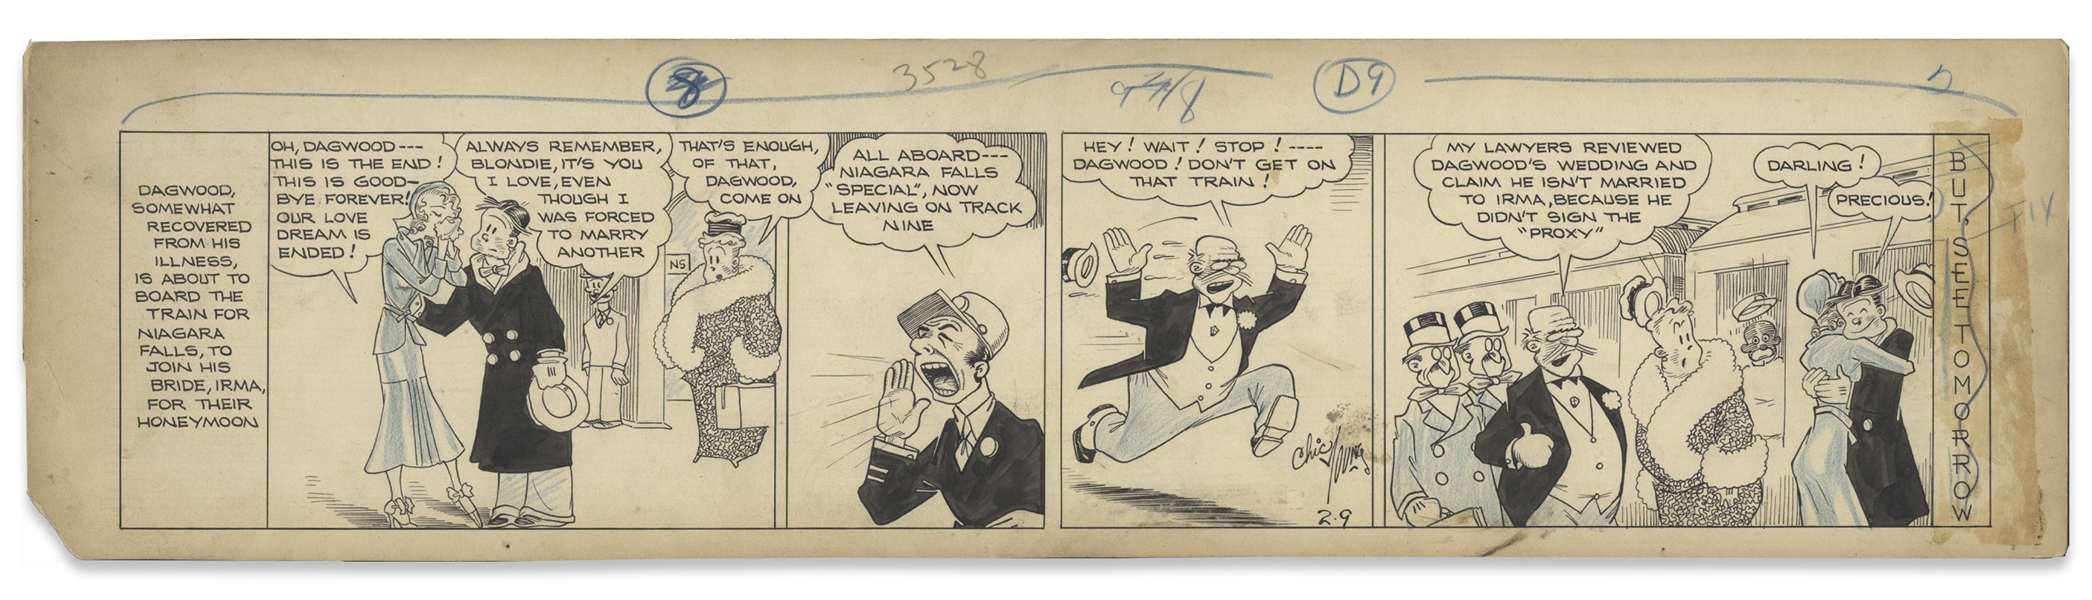 Chic Young Hand-Drawn ''Blondie'' Comic Strip From 1932 Titled ''A Free Soul'' -- Dagwood Discovers His Marriage to Irma Isn't Valid